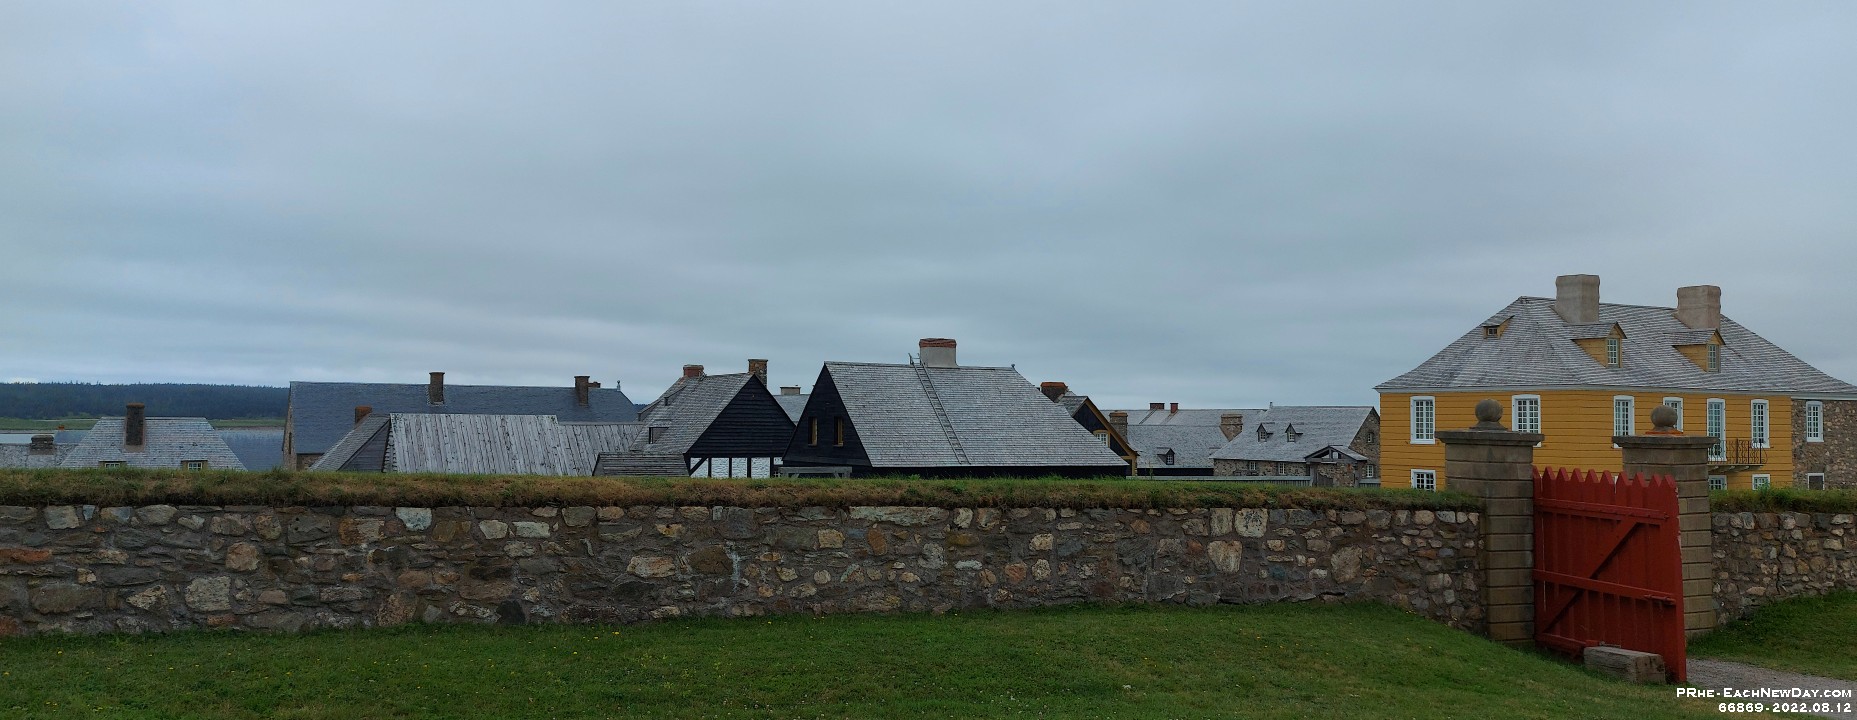 66869CrLeRe - At last! We visit the Fortress of Louisbourg, Louisbourg, NS